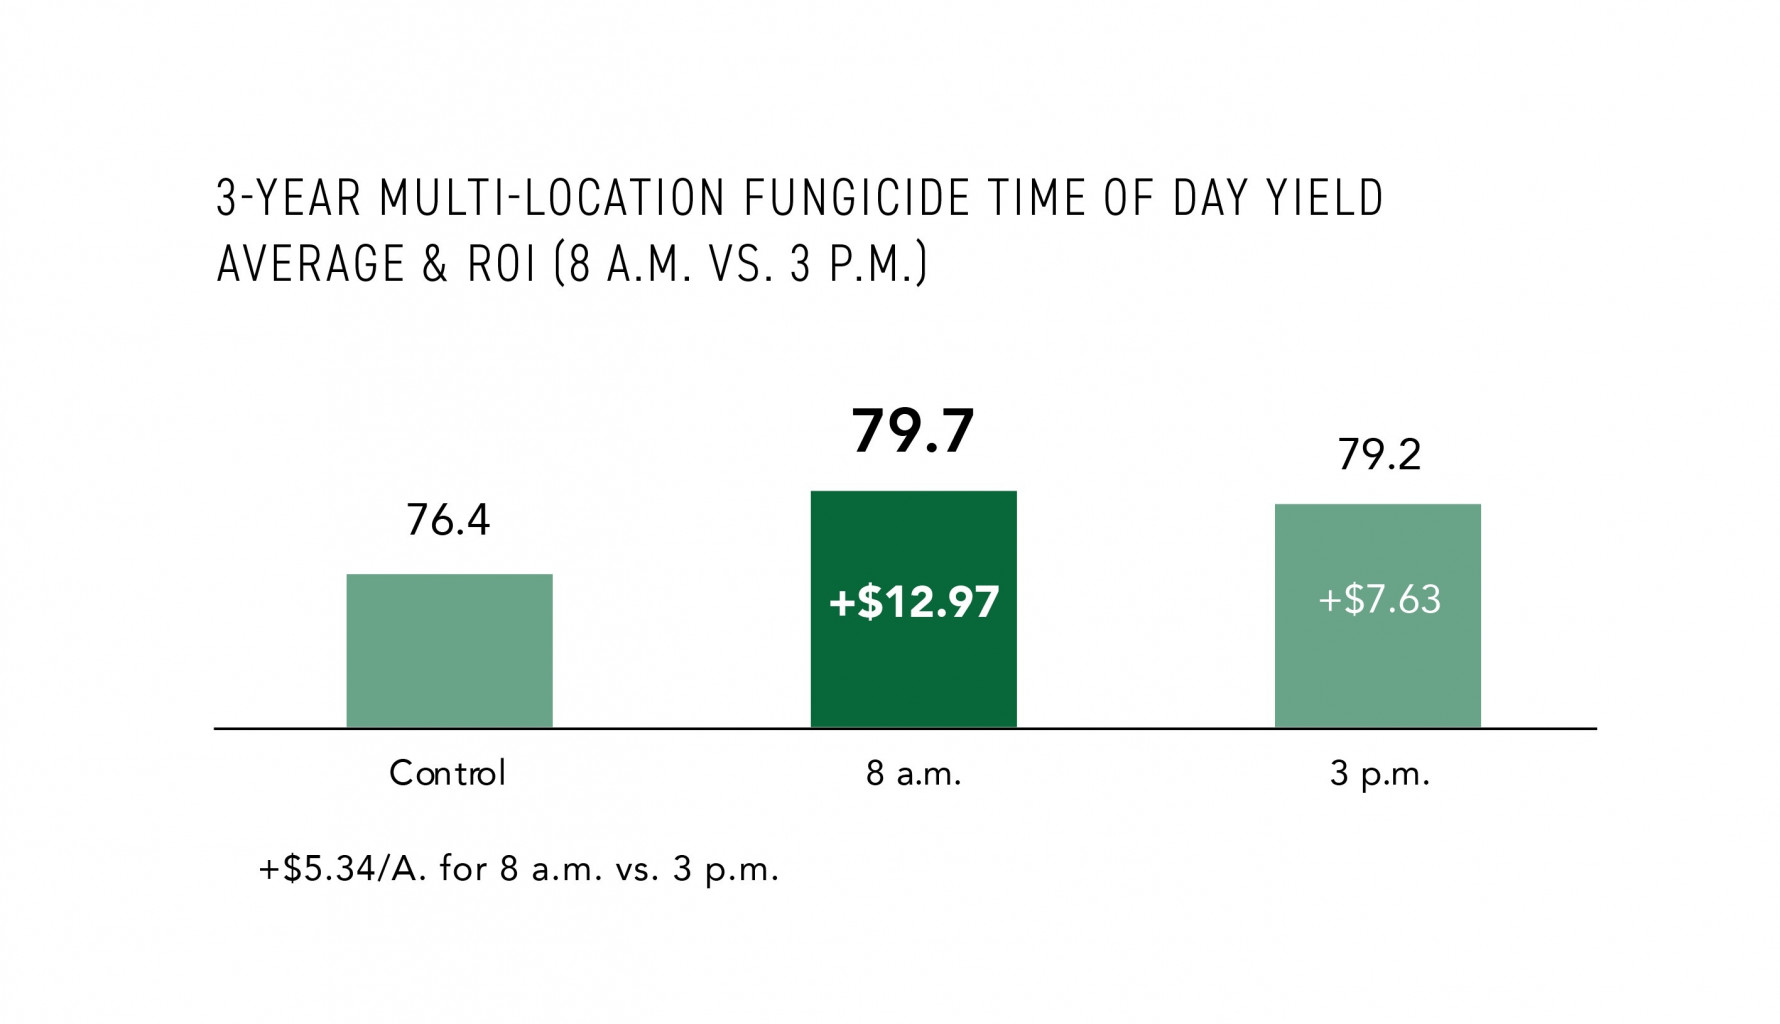 Fungicide Time of Day